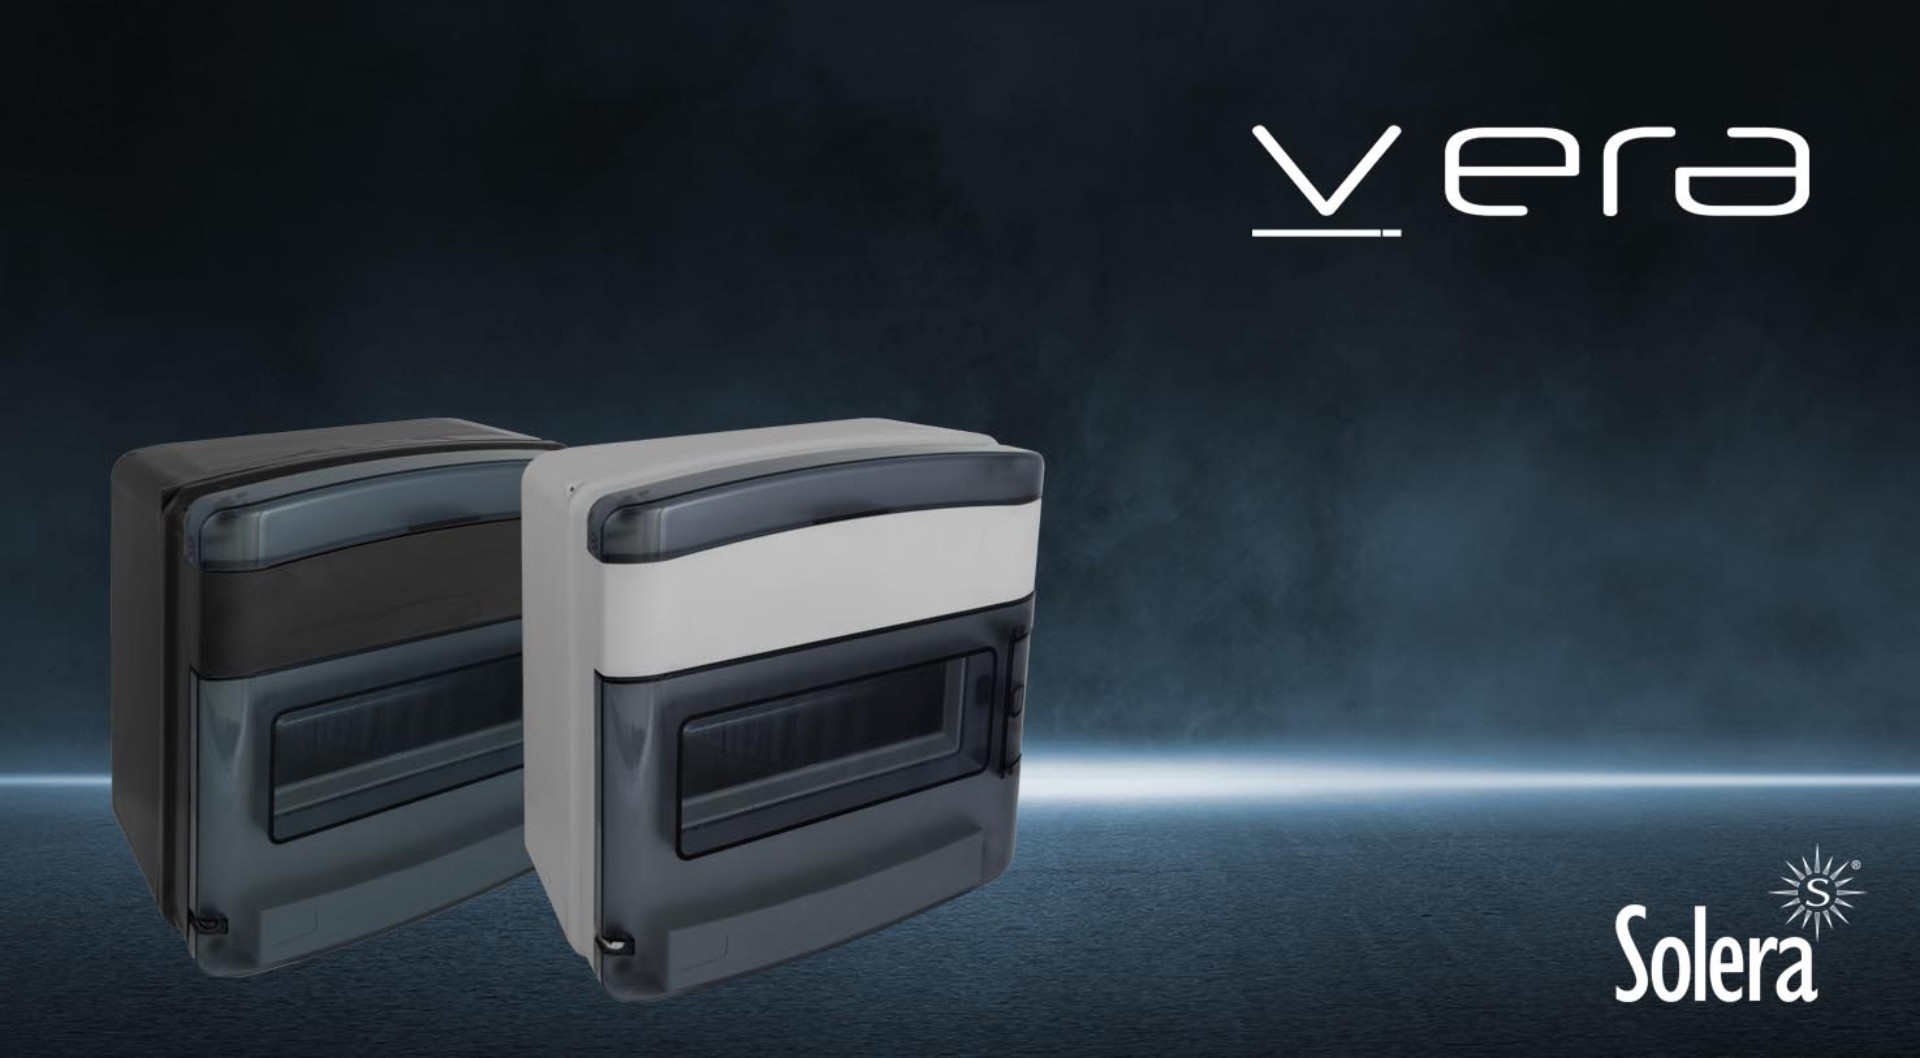  New VERA Range: Light up your Project with Style and Performance! 